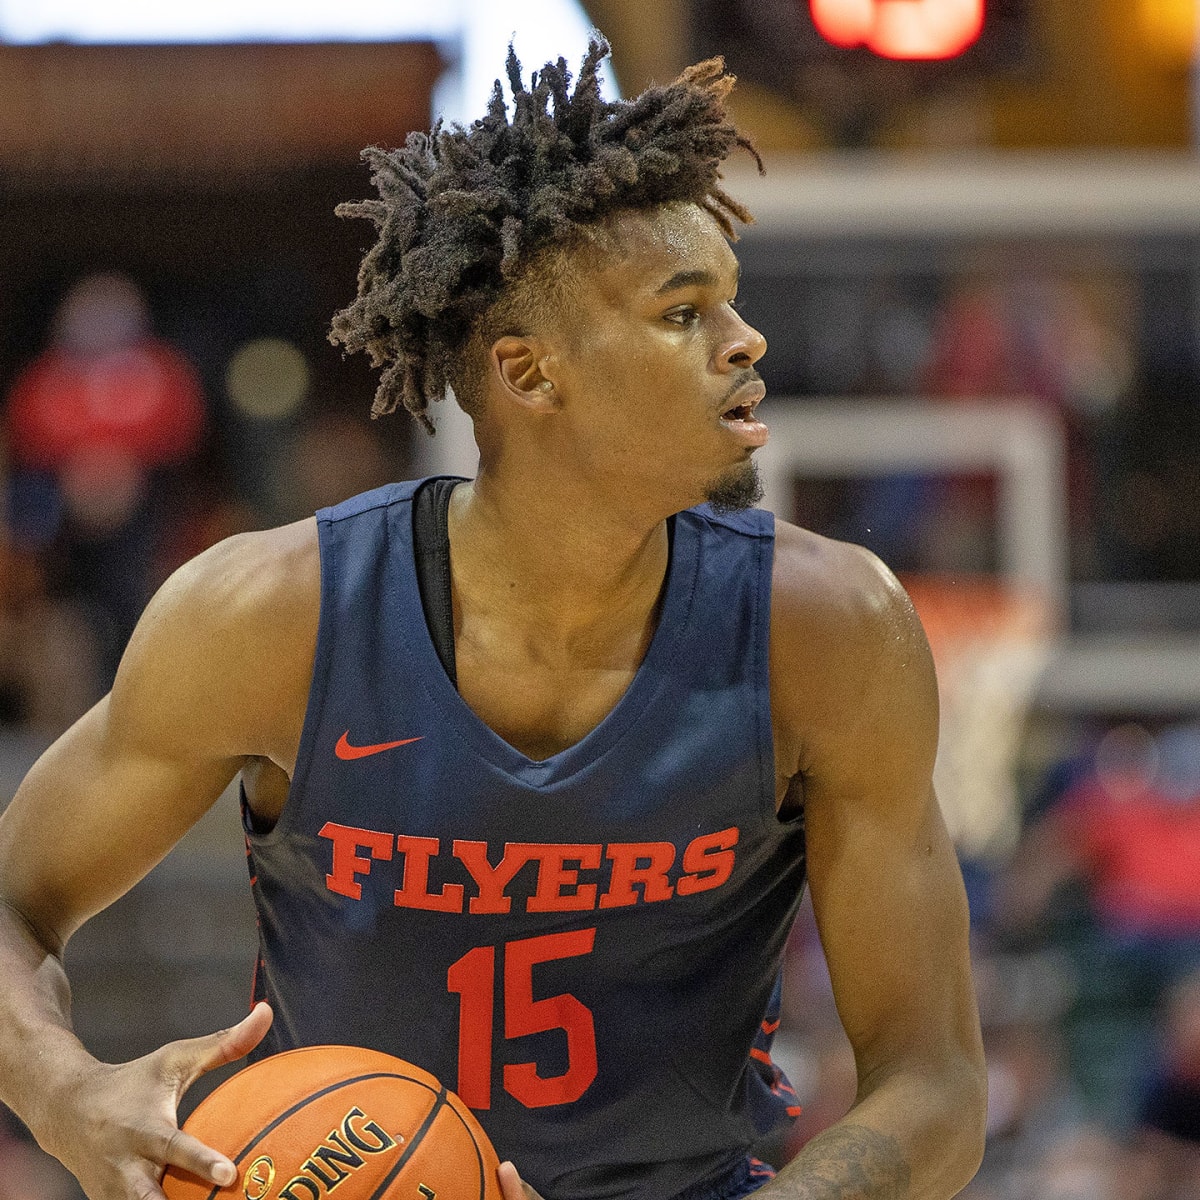 Dayton Flyers: An early look at 2022-23 roster